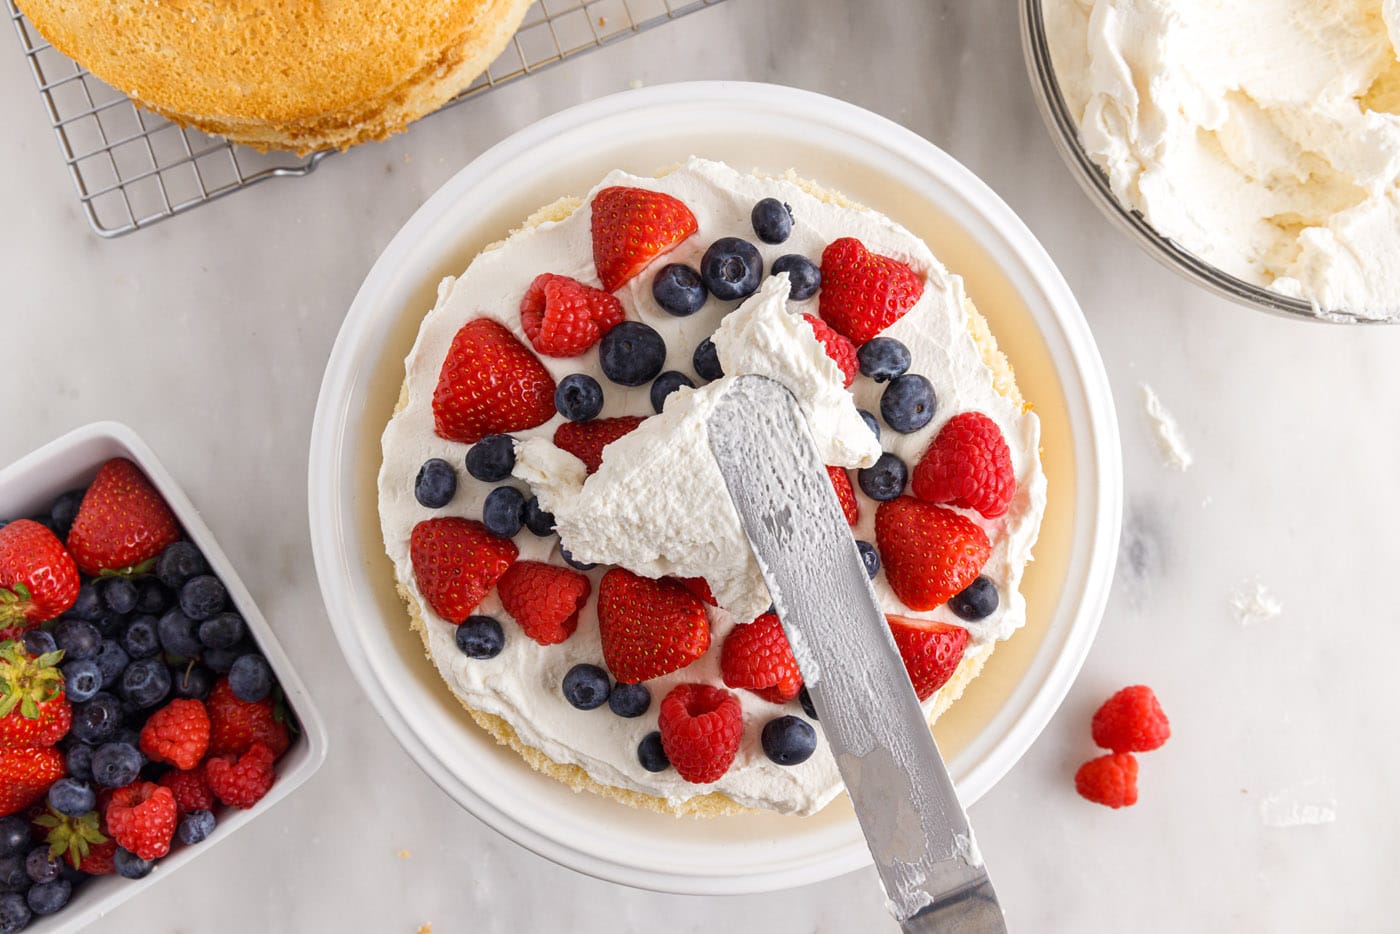 spreading chantilly frosting on top of fresh berries